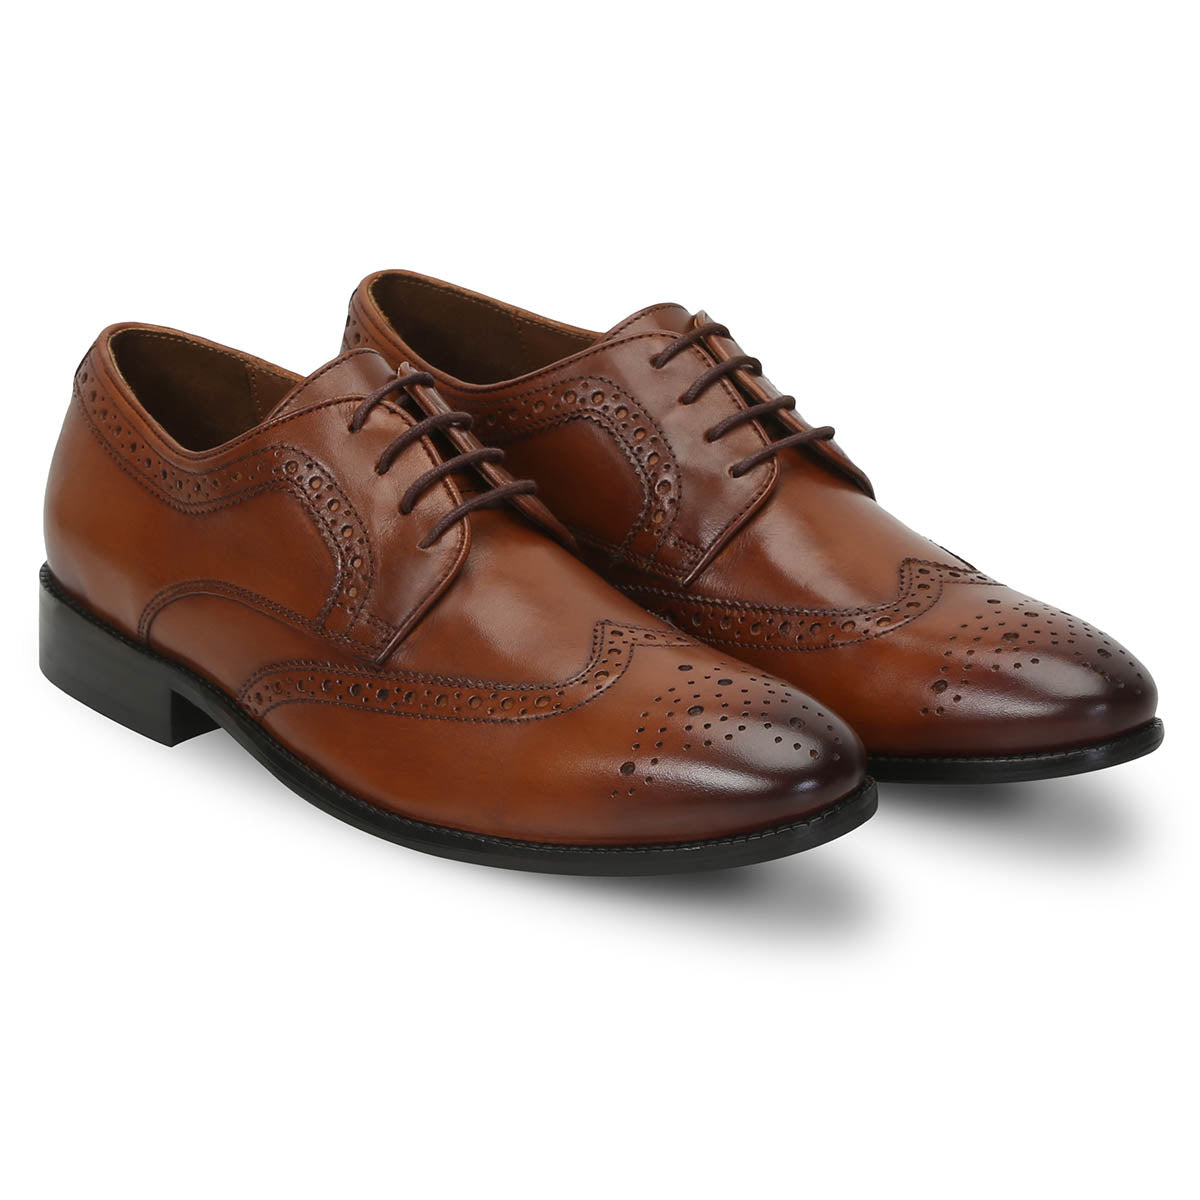 Tan Genuine Leather Brogue/Oxford By Brune